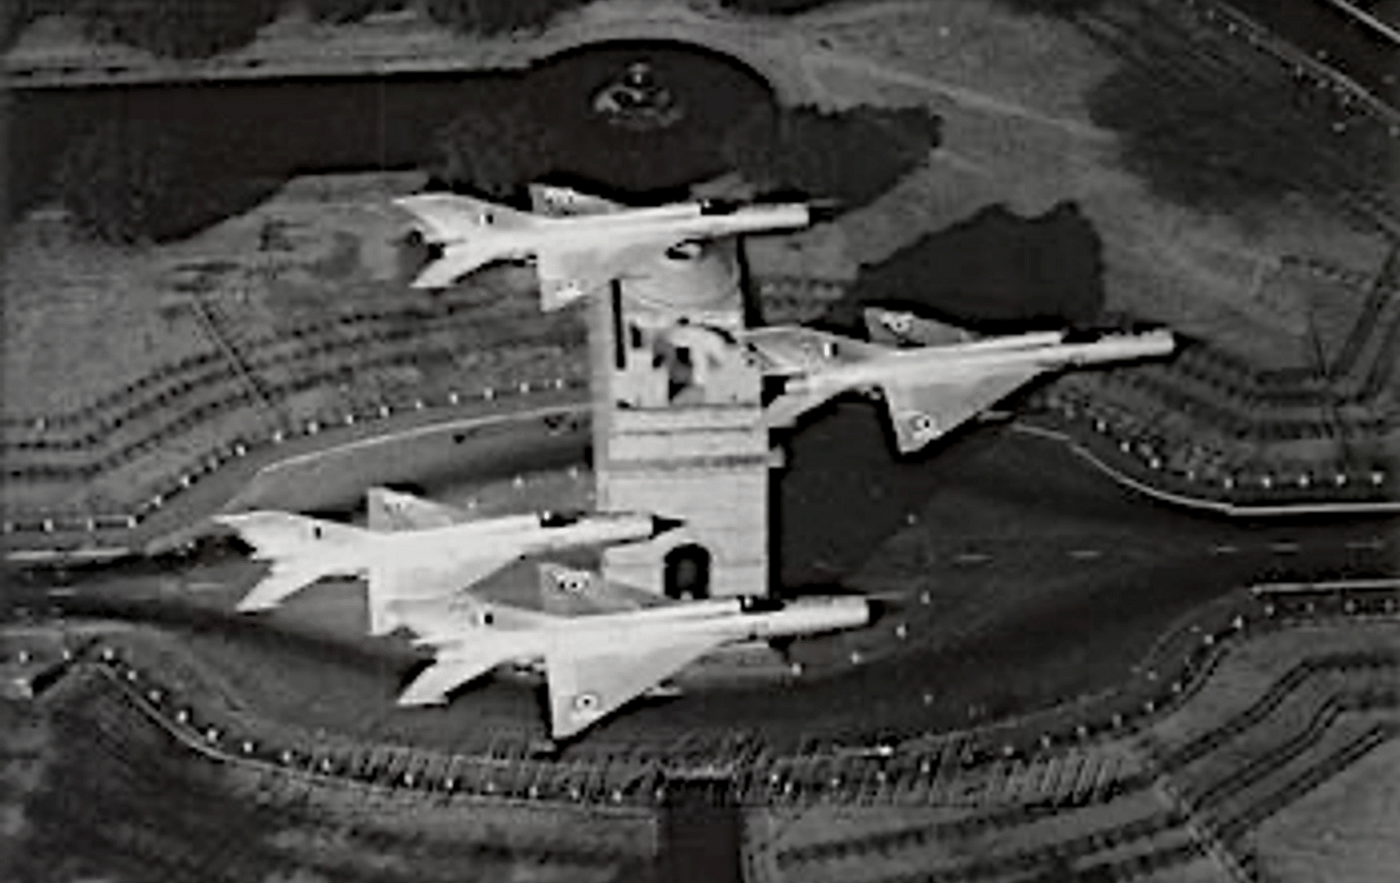 Flypast over India gate by four MiG-21FLs in 1967 led by Mally Wollen. | Photo: bharatrakshak.com